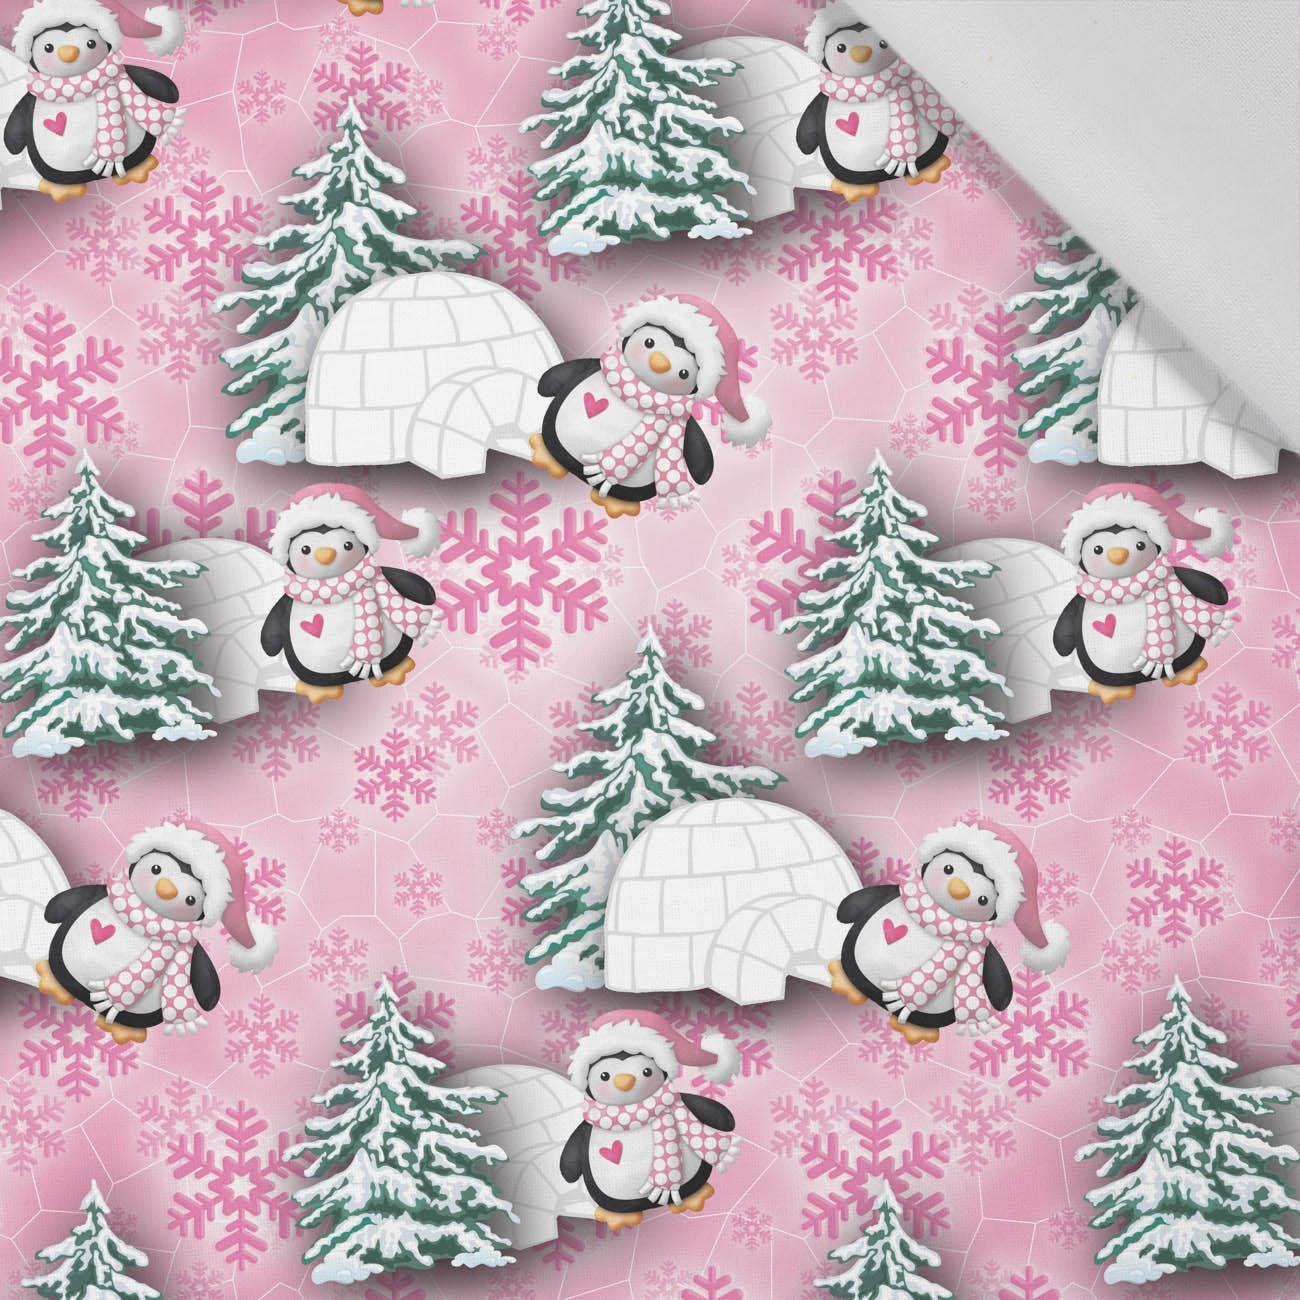 PENGUINS AND IGLOOS (PENGUINS) - Cotton woven fabric